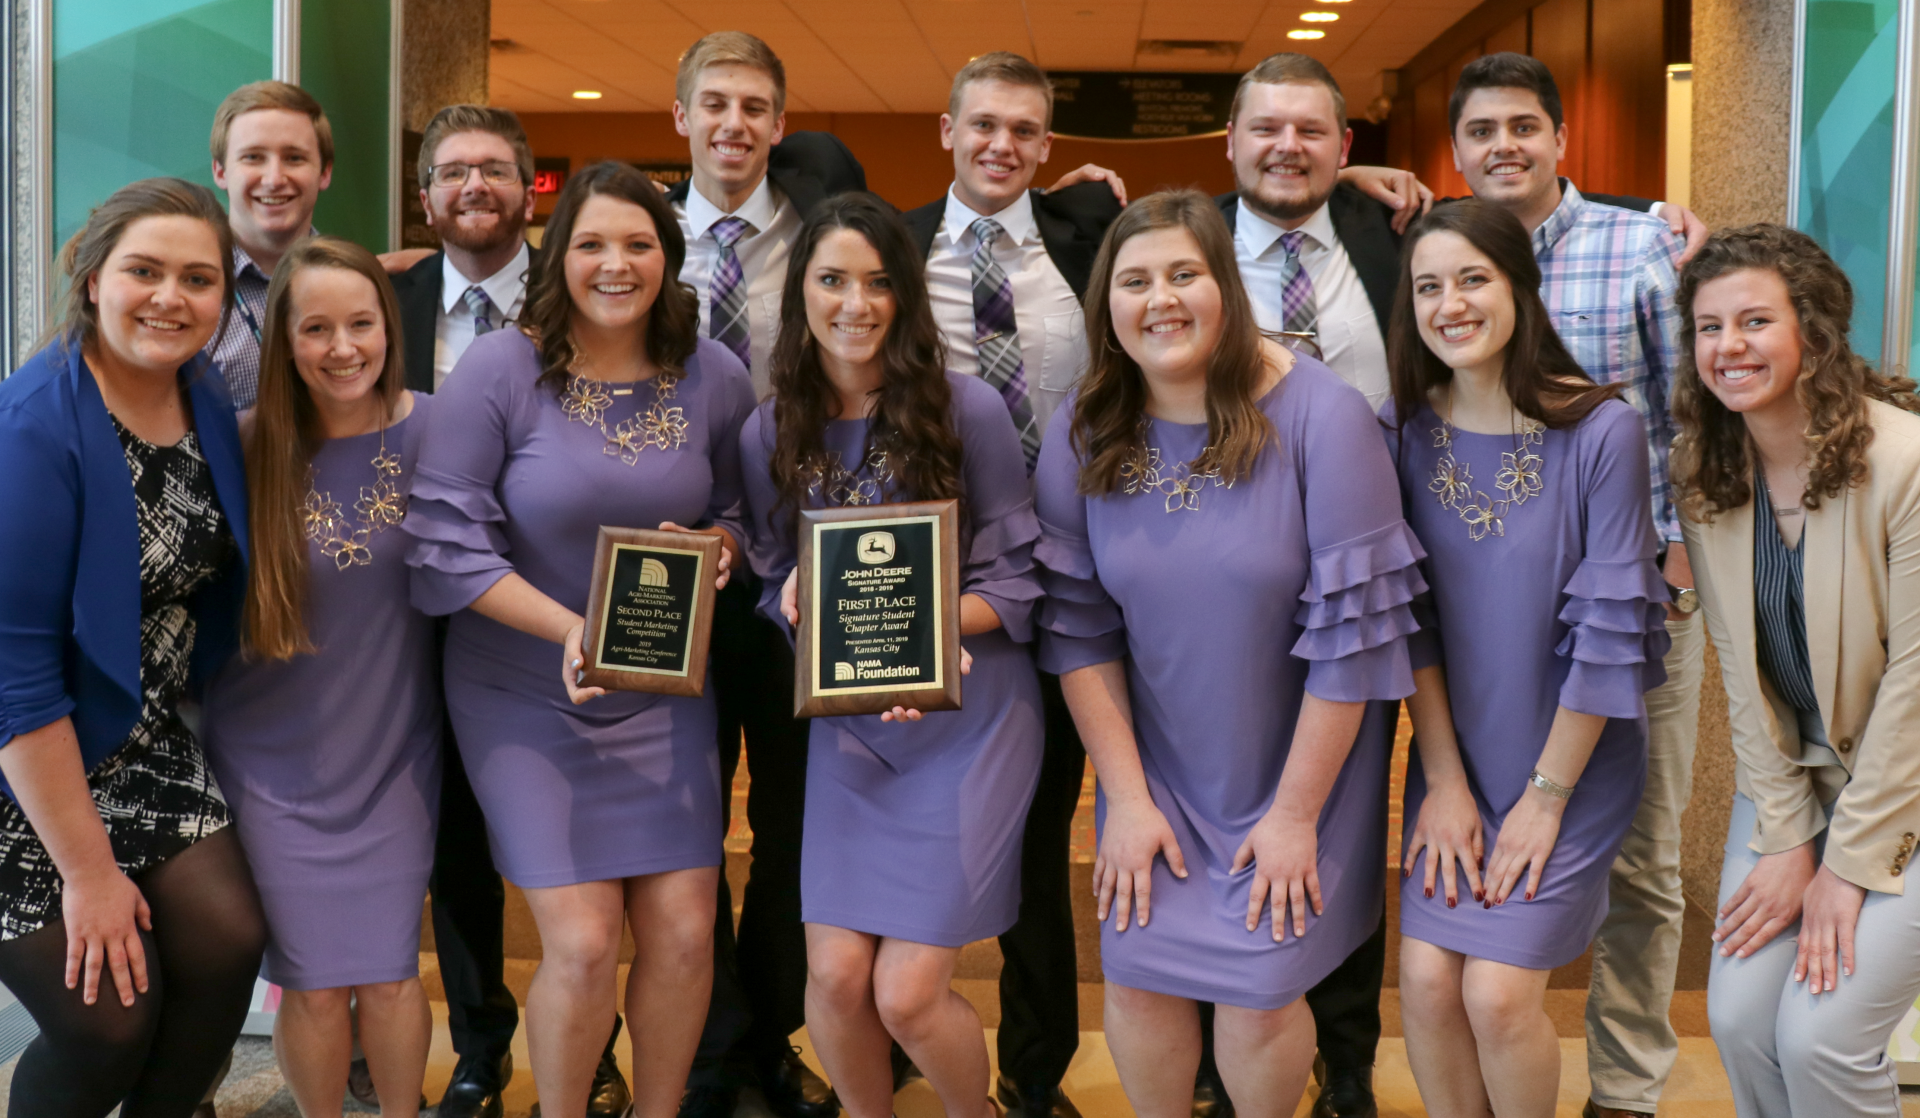 The 2019 Nebraska National Agri-Marketing Association poses with their second place plaques